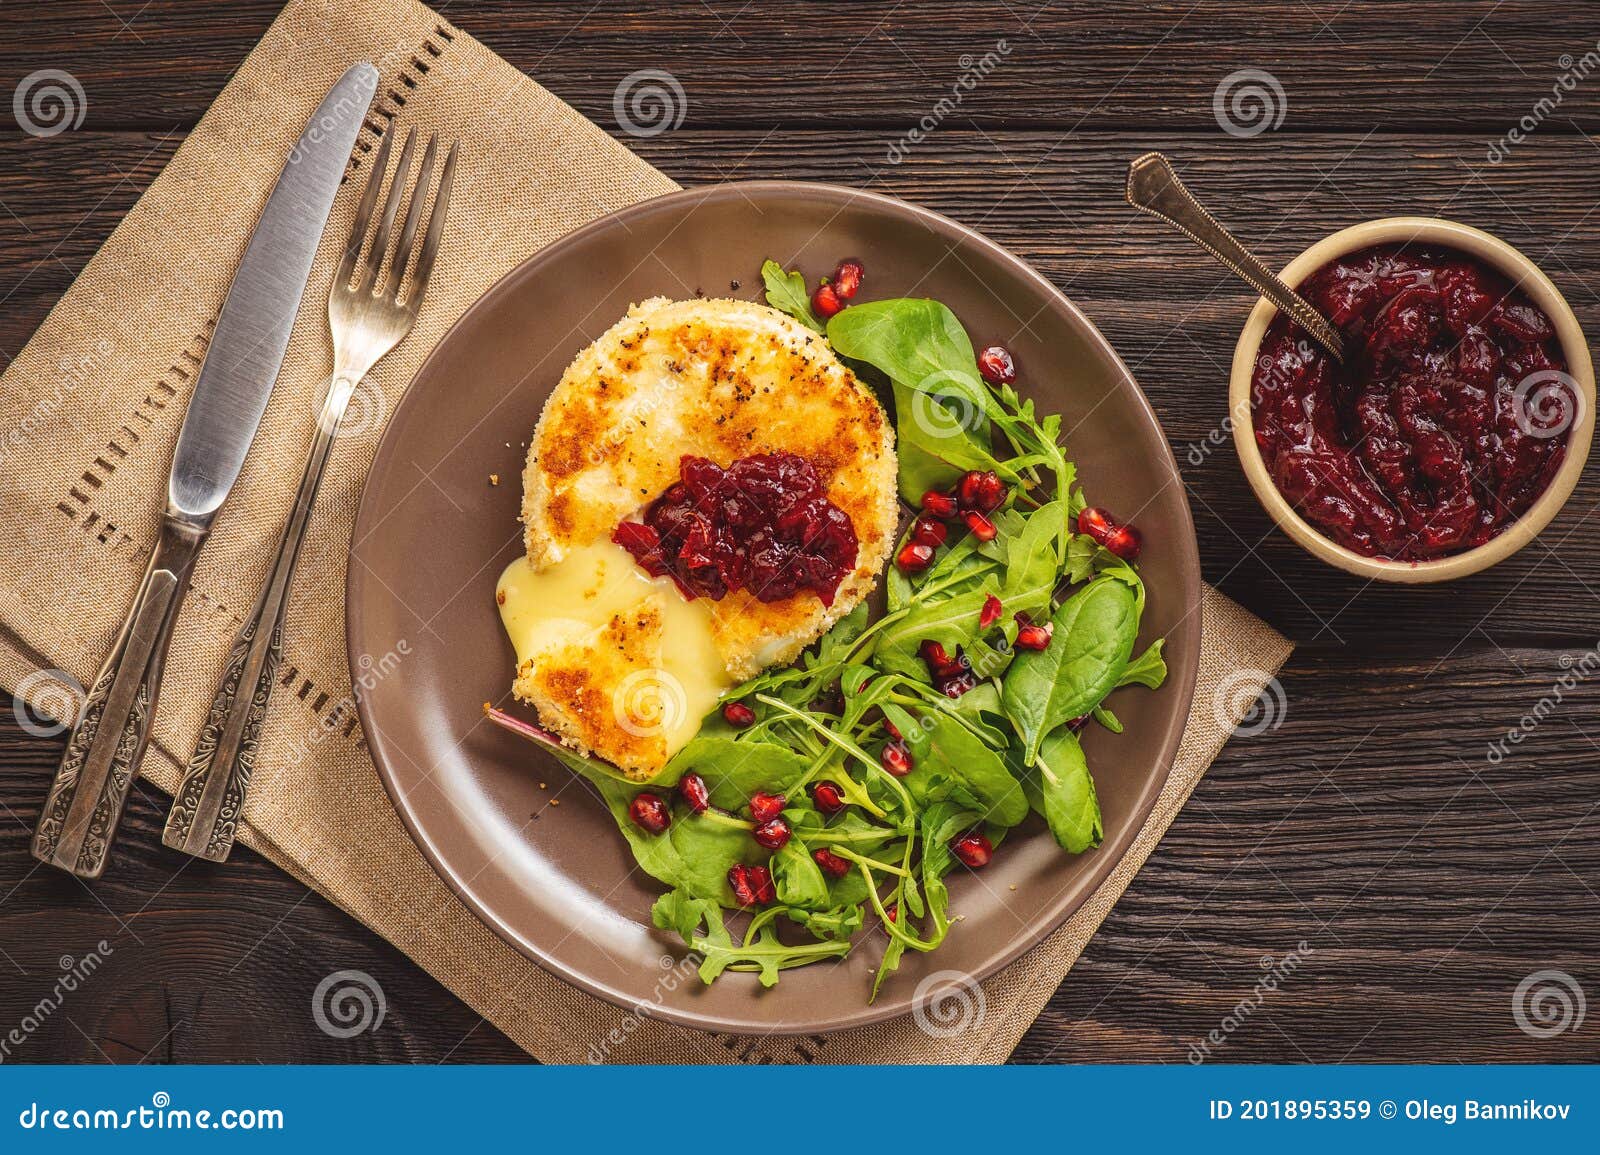 Fried Camembert Cheese and Cranberry Sauce. Stock Image - Image of ...